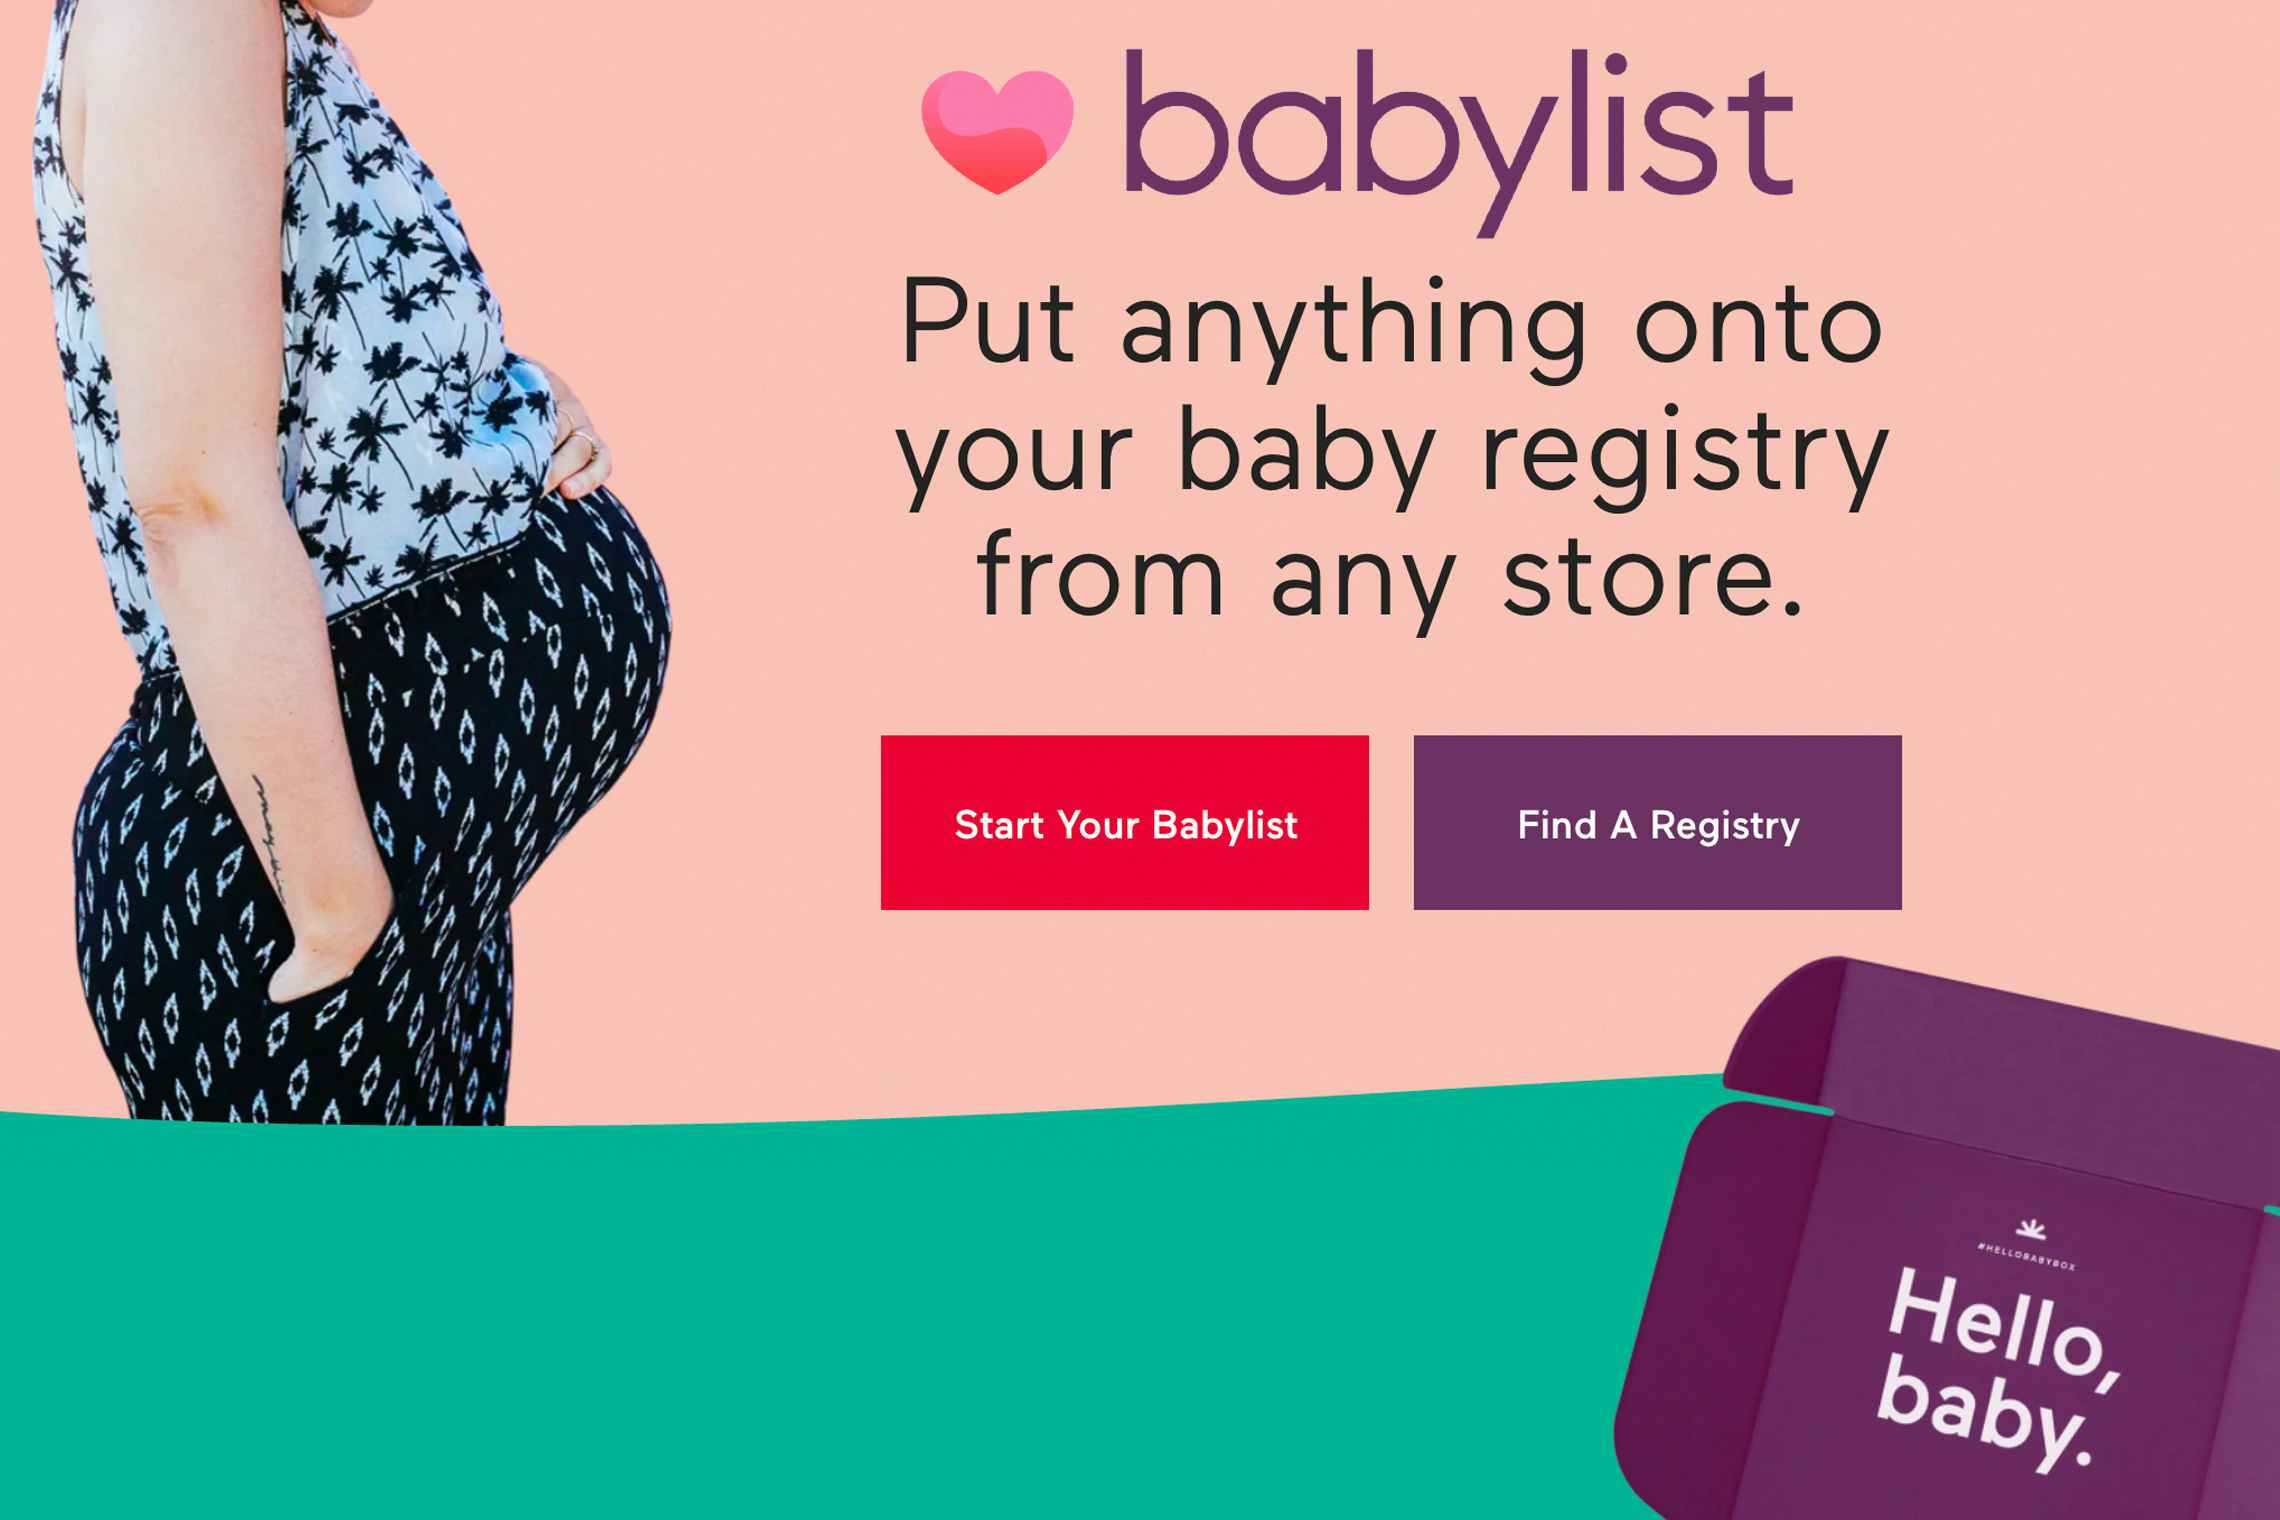 A Babylist.com website screenshot that reads, "babylist. Put anything onto your baby registry from any store." with an image of a pregnant woman.